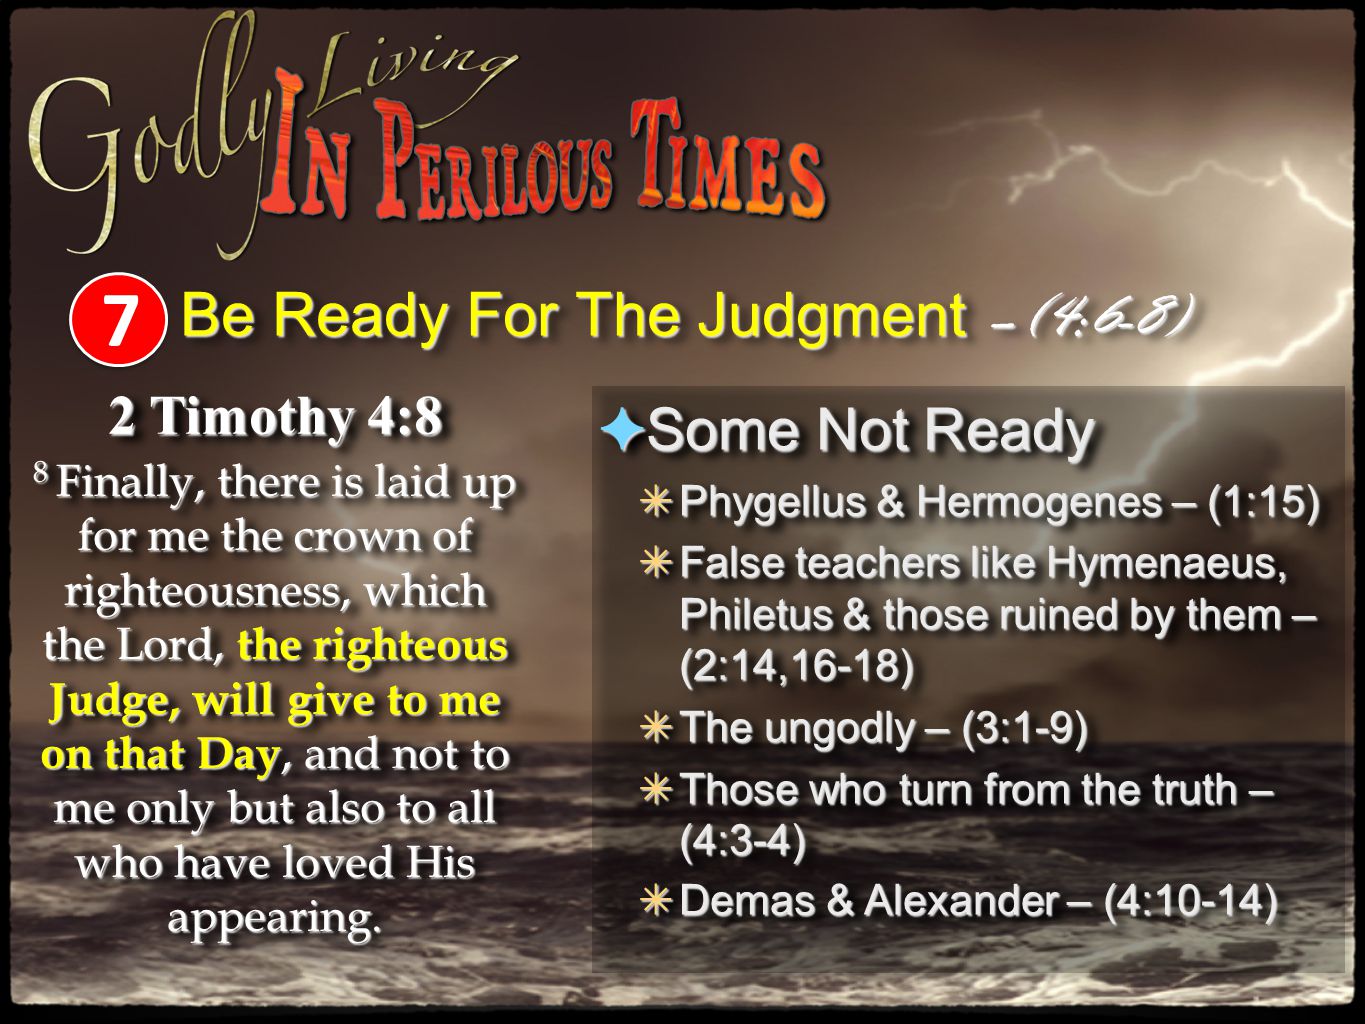 Be Ready For The Judgment –(4:6-8)